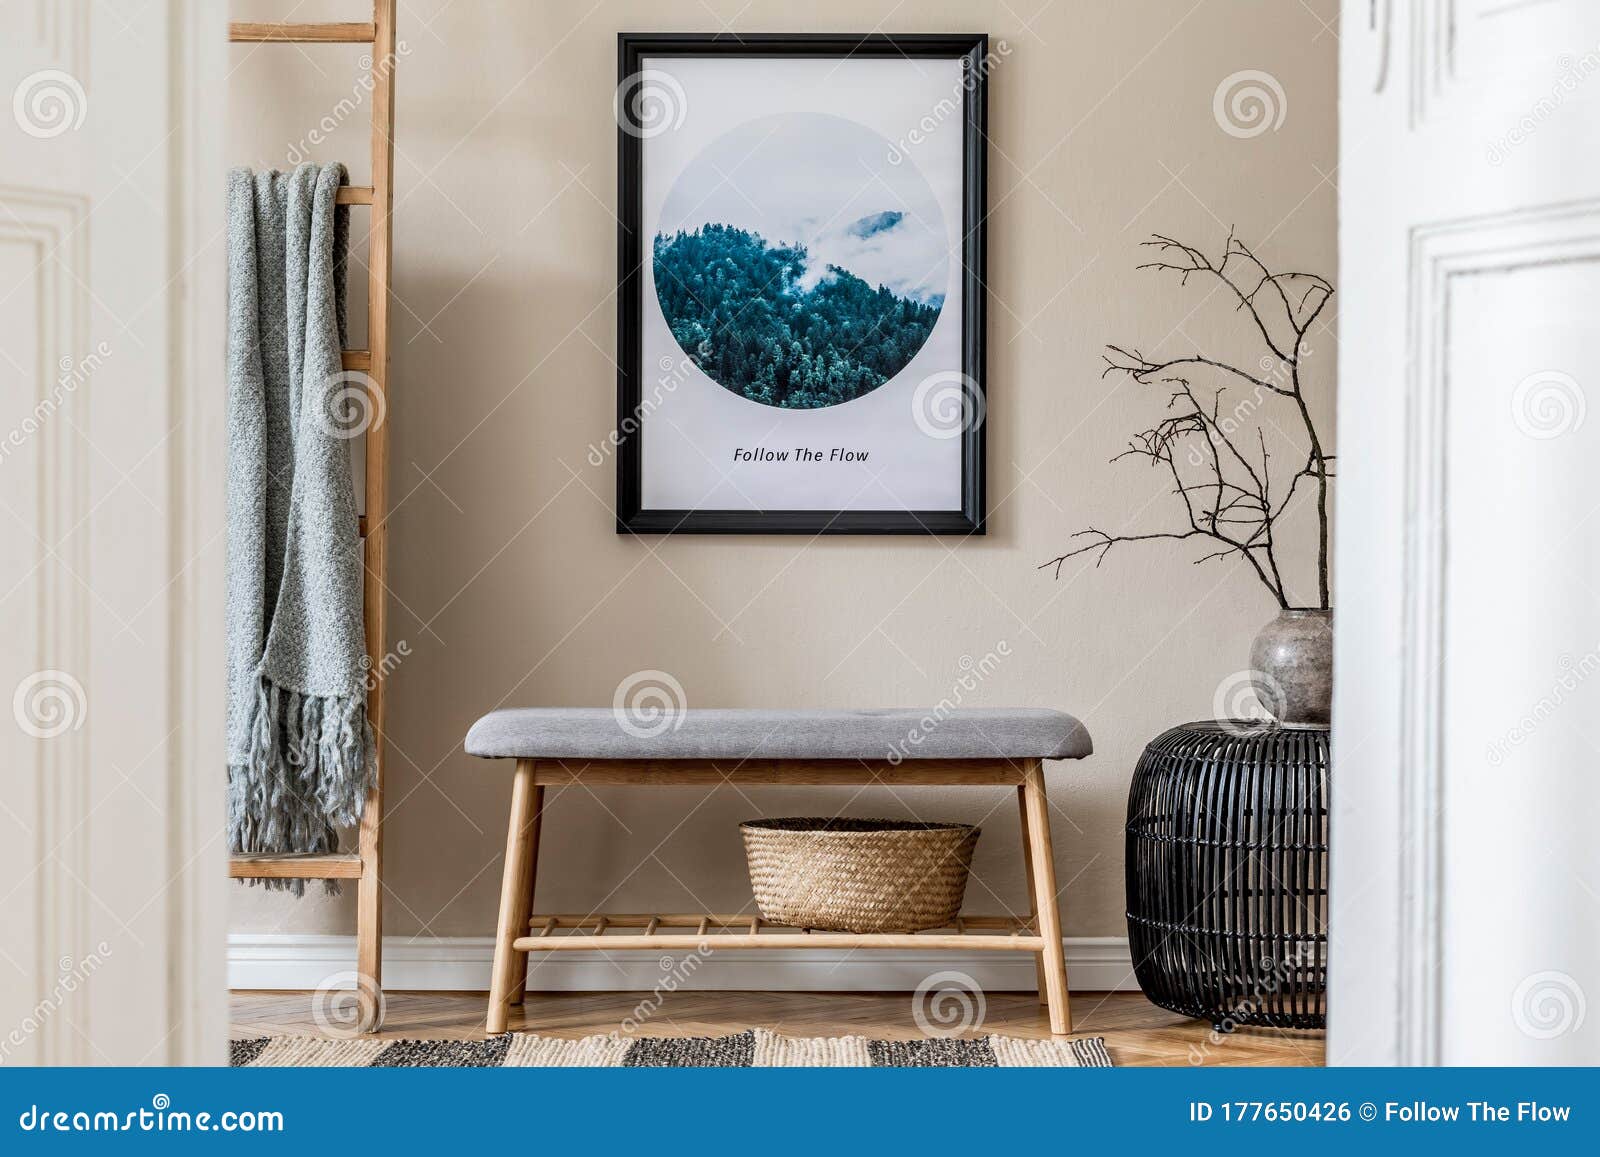 scandinavian living room with mockup poster frame, stylish furnitures and elegant accessories. japandi interior  style.